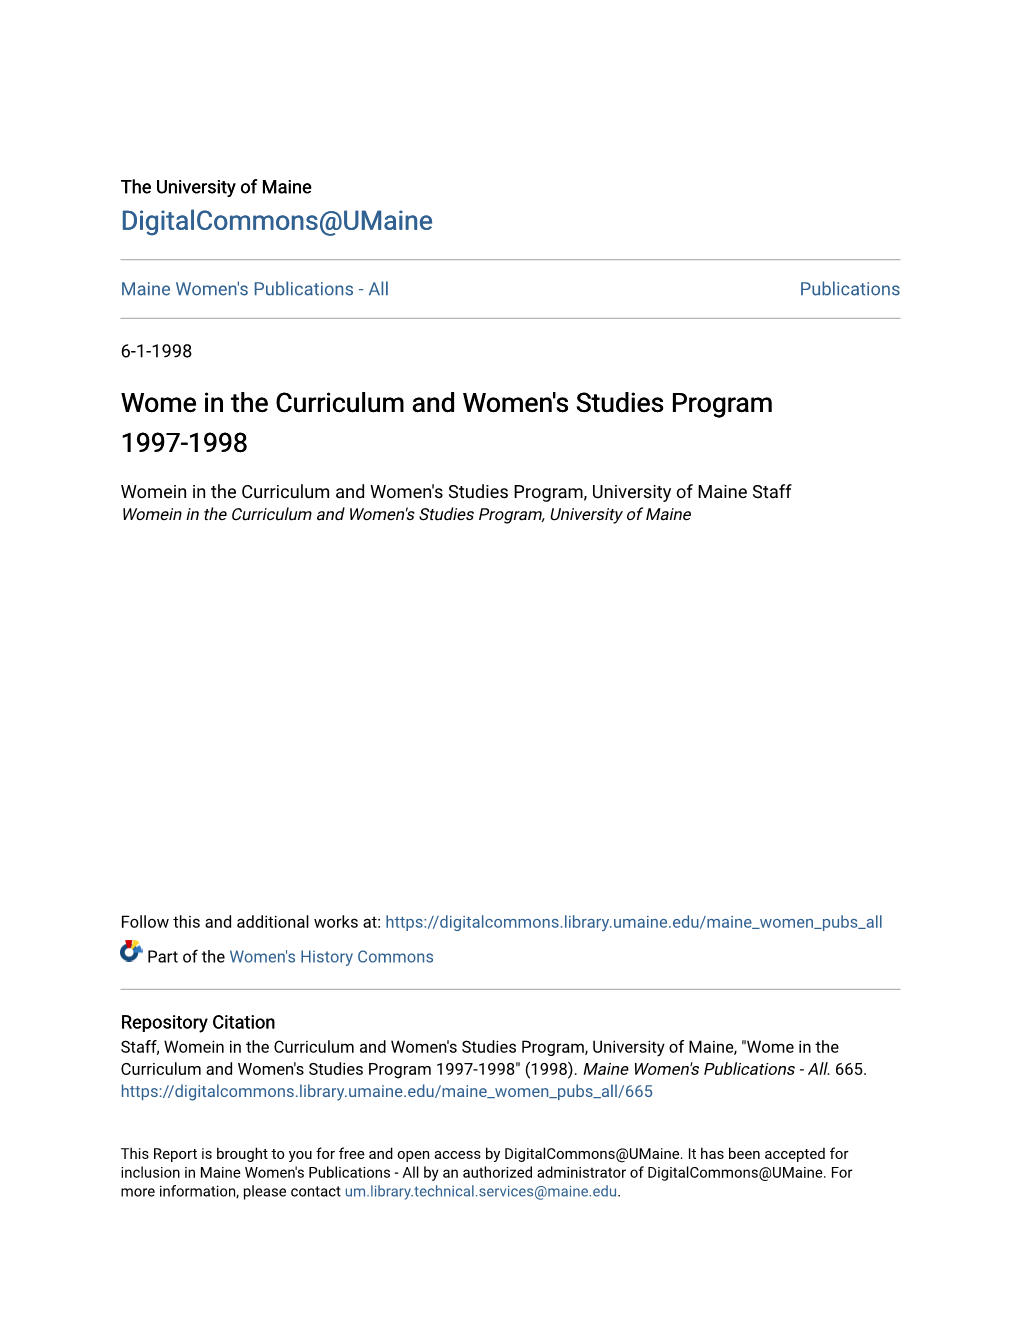 Wome in the Curriculum and Women's Studies Program 1997-1998